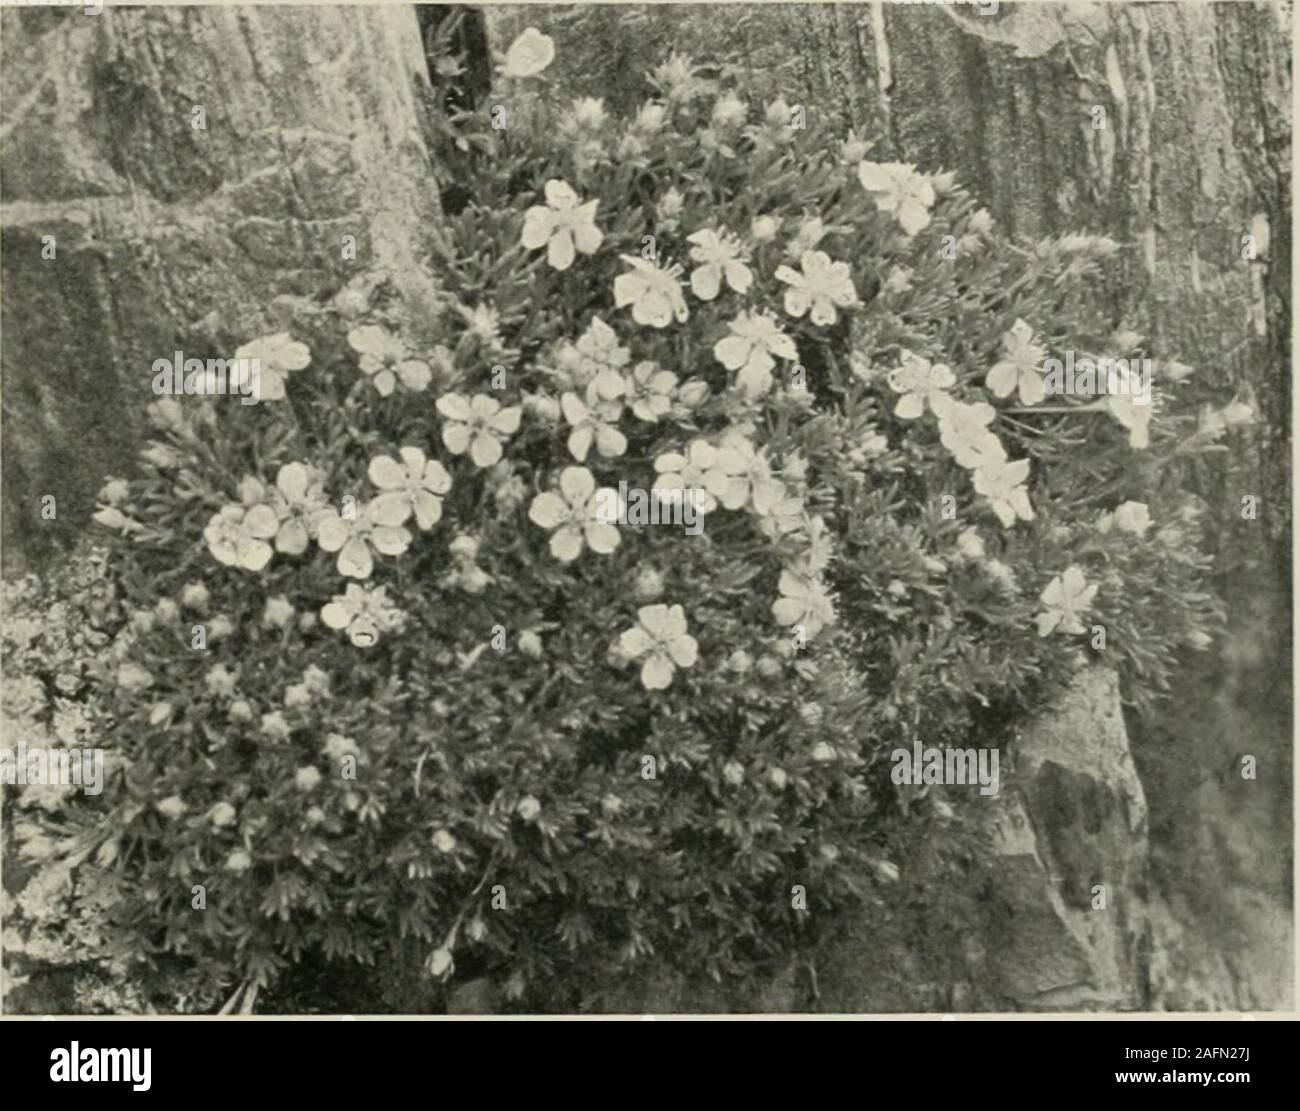 . Karakoram and western Himalaya 1909, an account of the expedition of H. R. H. Prince Luigi Amadeo of Savoy, duke of the Abruzzi. ur of Gasherbrura, about 18,000 feet.] Saxifragaceae. Saxifraga sibirica L. Conway, p. 79. Ascent of Skoro La, north side; 11,000-13,000 feet. Saxifraga imhricata Ro3-Ie. Conway, p. 79. Braldoh valley, between Dussoand Askoley; 7,900-10,000 feet; according to photograph also on western spur ofGasherbrum, 18,000 feet. The example representing this species in the collection is very poor, but it is supplementedby the fine photograph here reproduced (Fig. II). Botanica Stock Photo